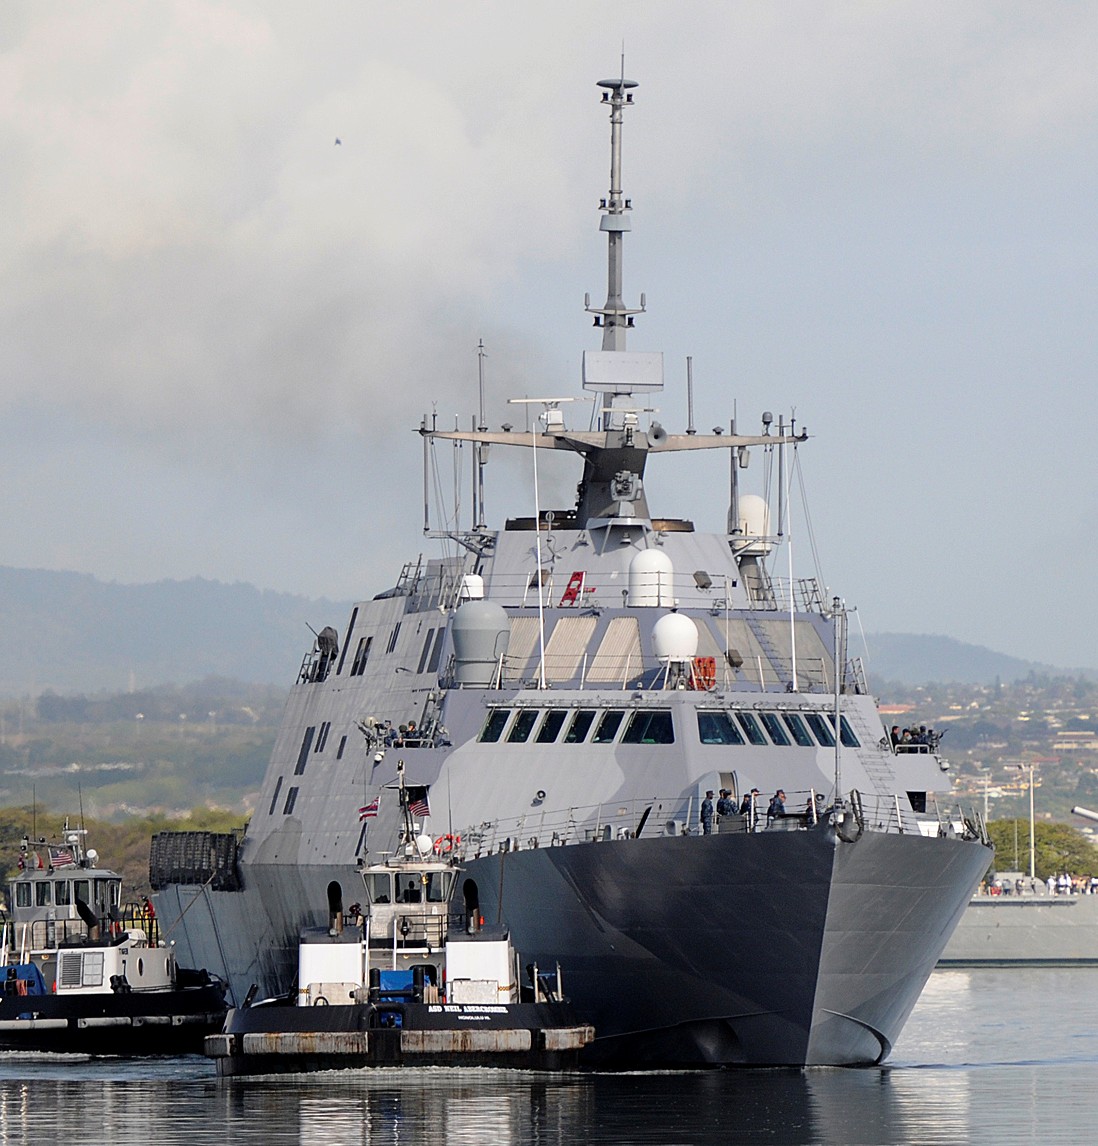 lcs-1 uss freedom class littoral combat ship us navy 36 joint base parl harbor hickam